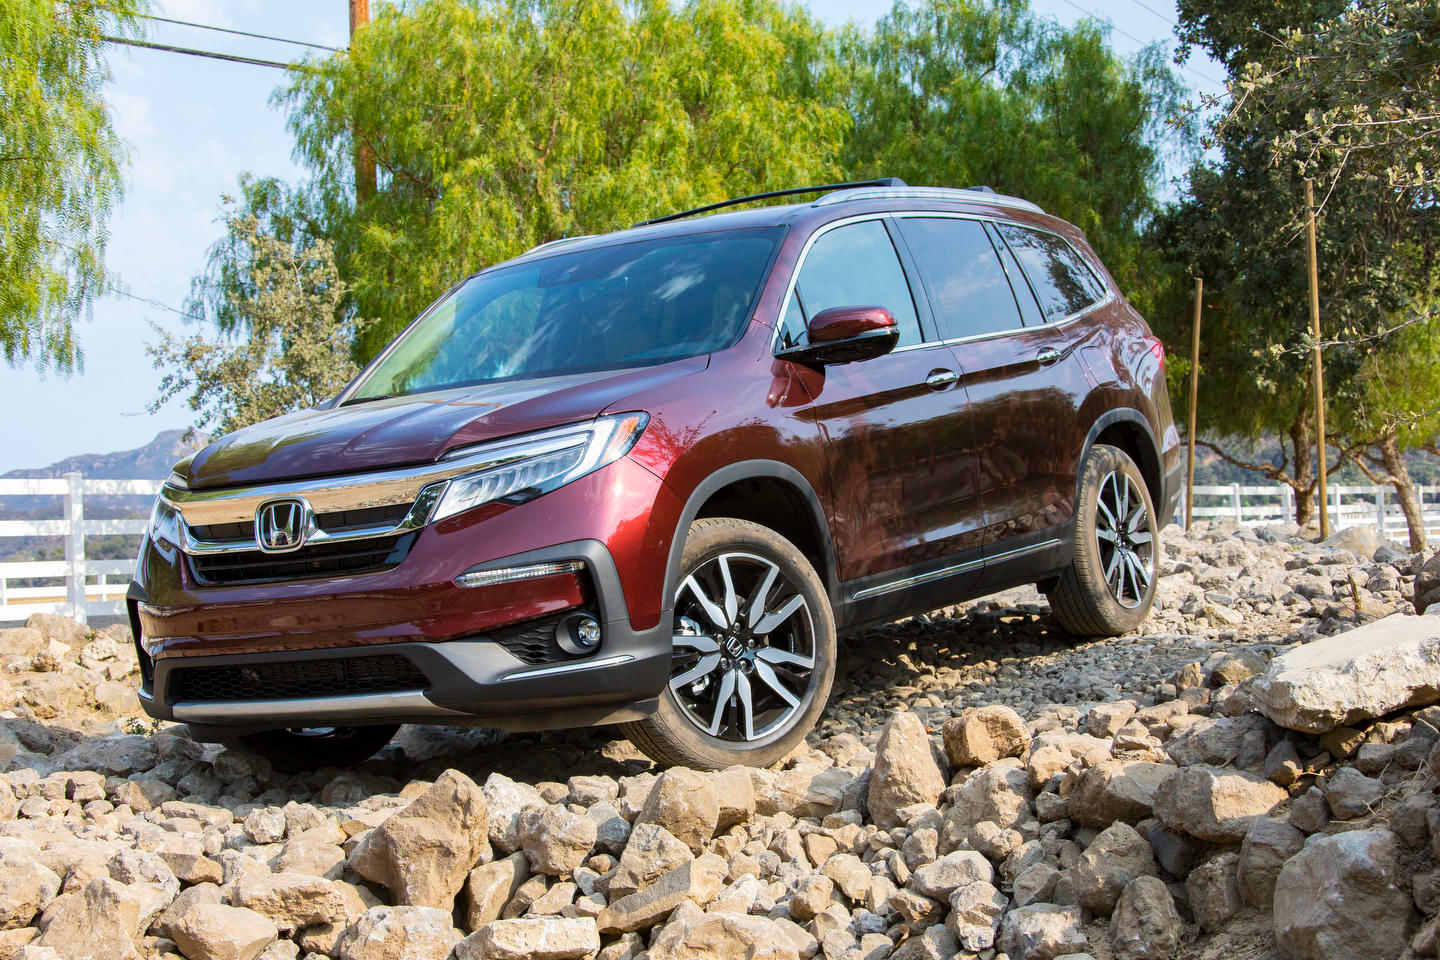 All About Honda All-Wheel Drive Vehicles